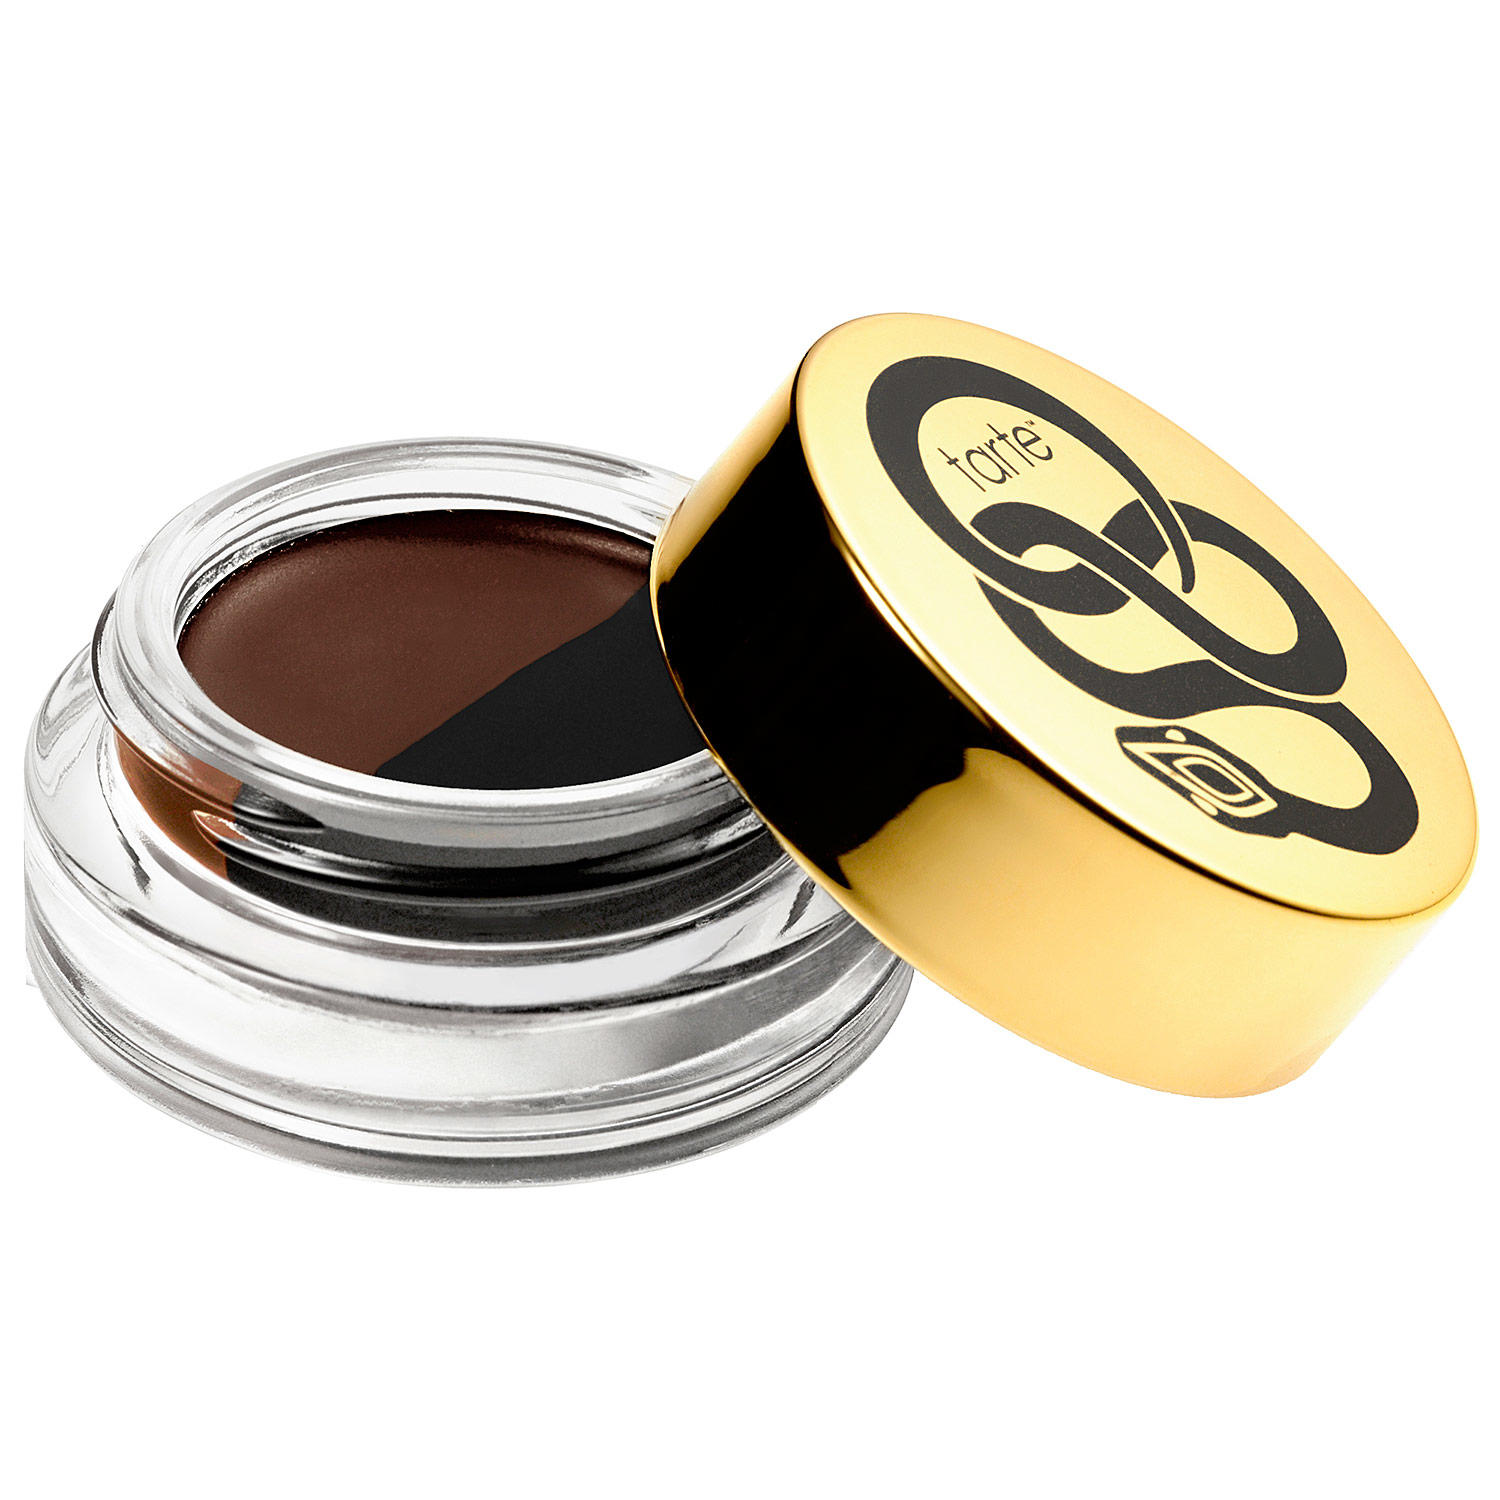 Tarte Limited Edition Amazonian Clay Dual Liner Black/Bronze 